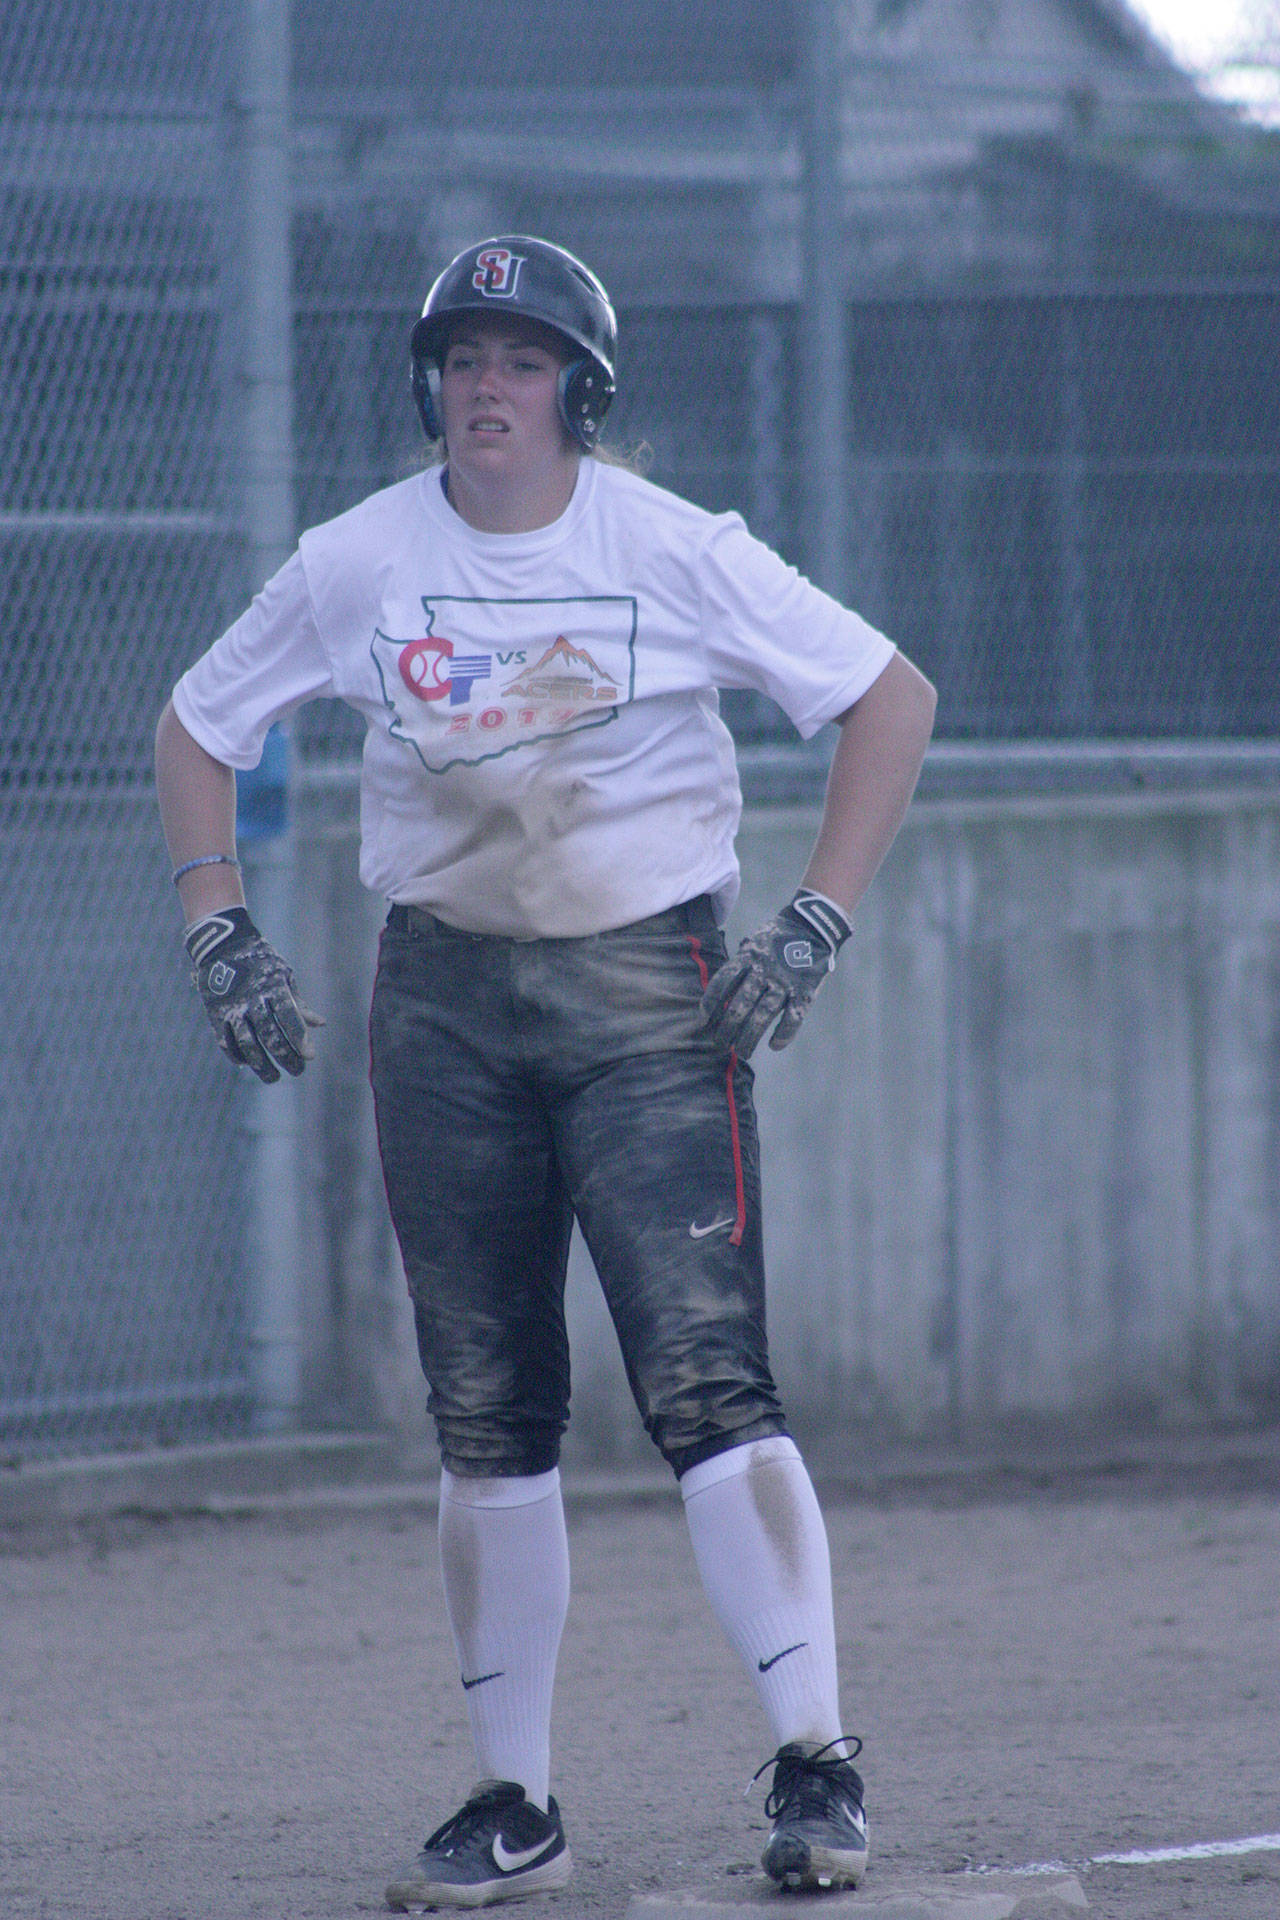 Carley Nance, another former Acer and an all-conference pitcher at Seattle University, comes away dirty after sliding into third base. MARK KLAAS, Kent Reporter